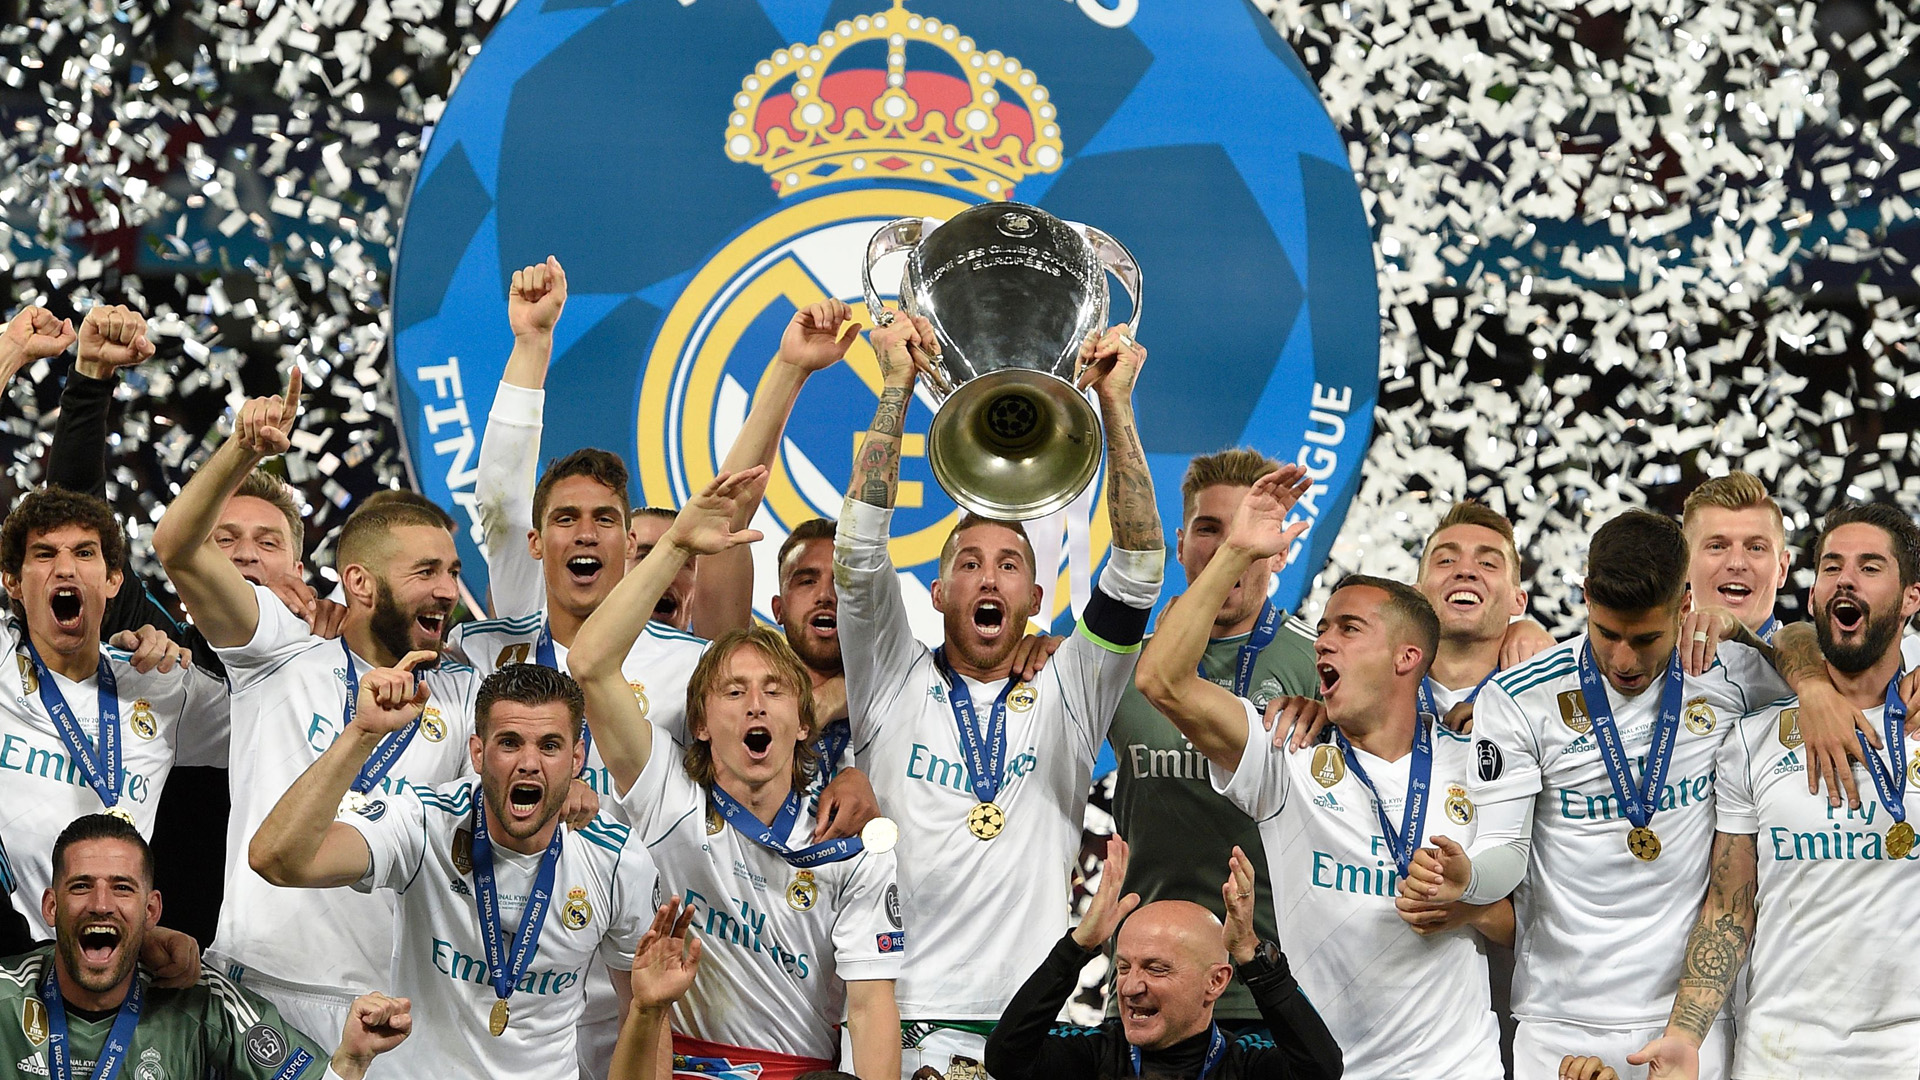 are real madrid the greatest champions league team in history?